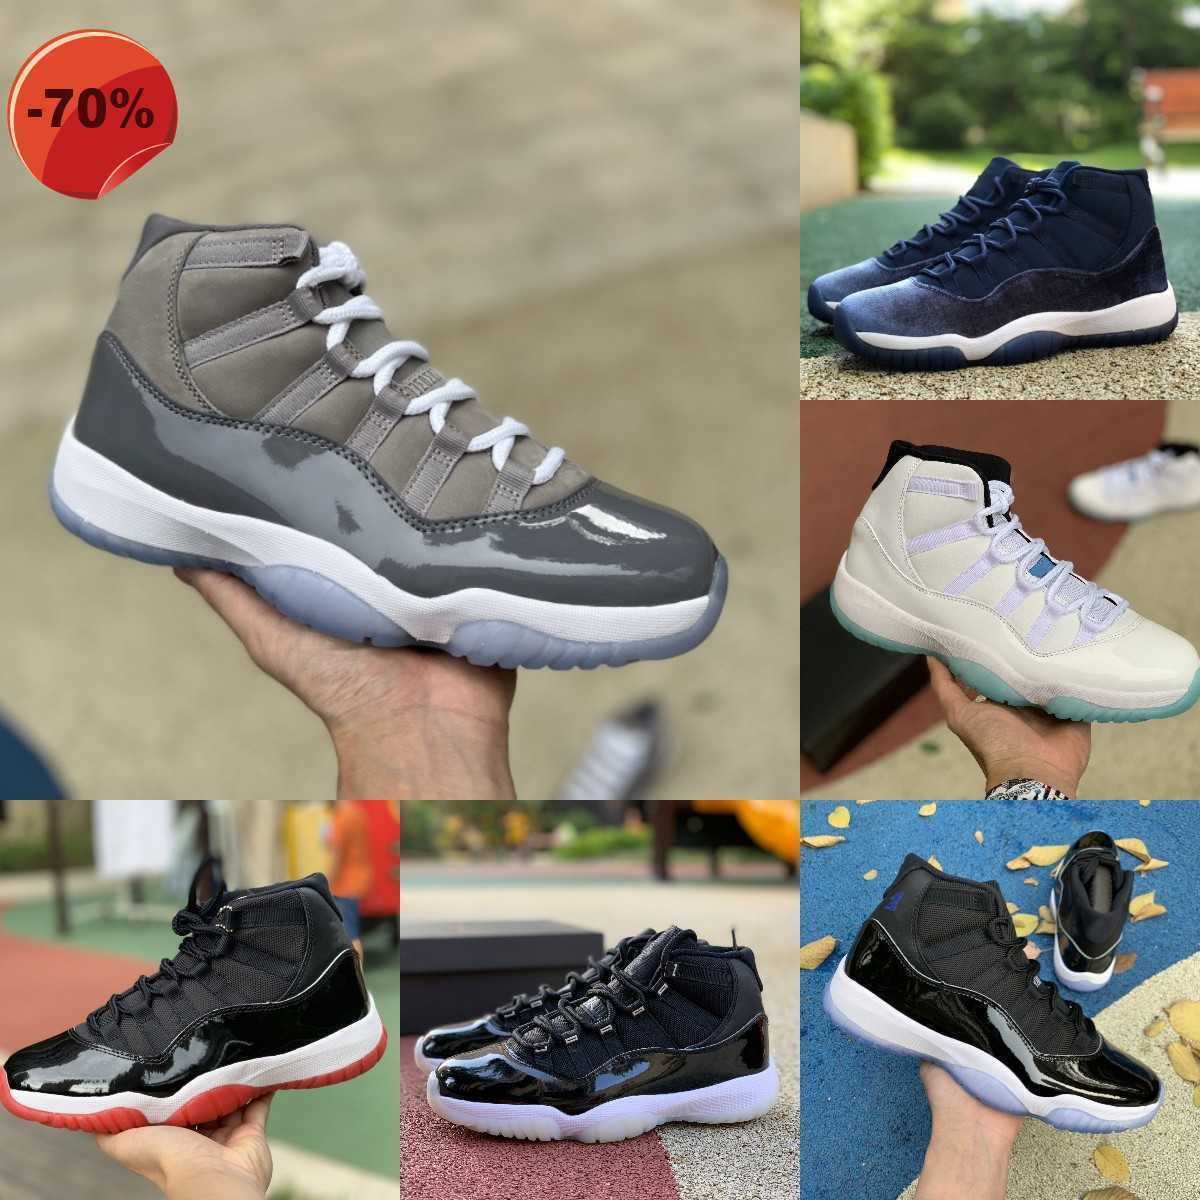 

Sandals With Box Jumpman Jubilee 11 11s High Basketball Shoes Mens Women COOL GREY Legend Blue Midnight Navy Playoffs Bred Space Jam Gamma Blue Easter Concord 45 Low, M3030